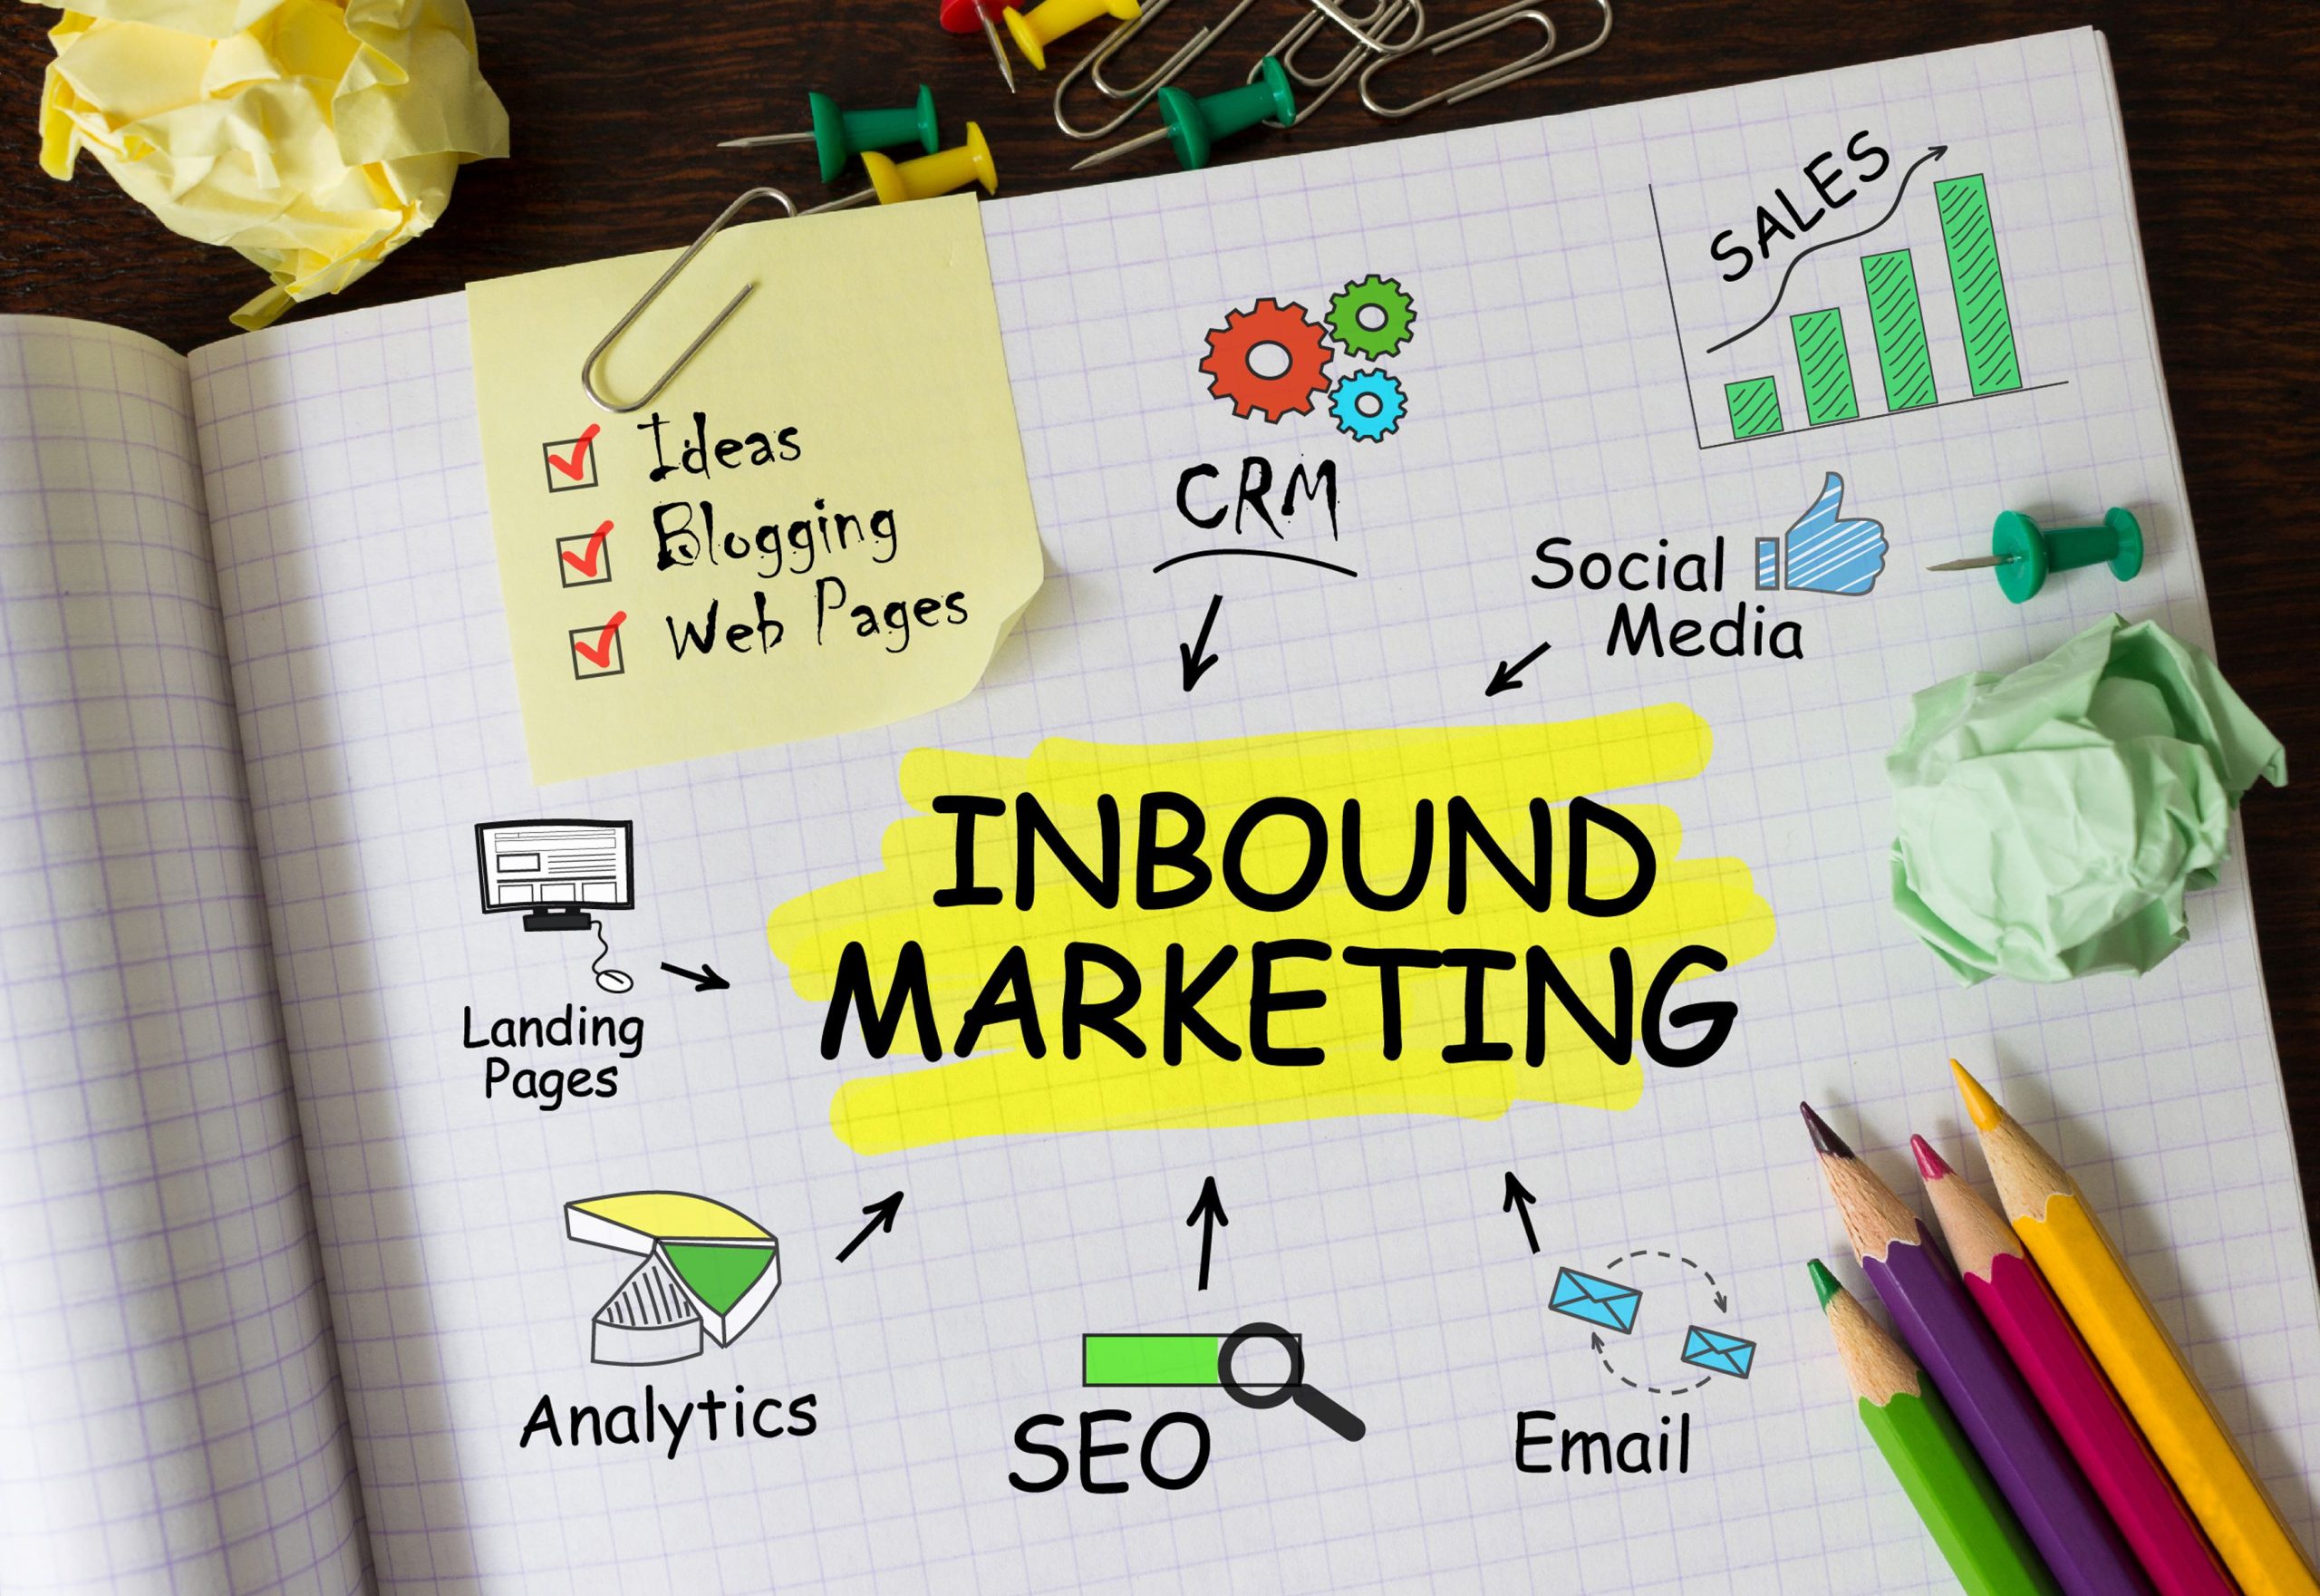 Why Social Media is an Essential Part of Inbound Marketing